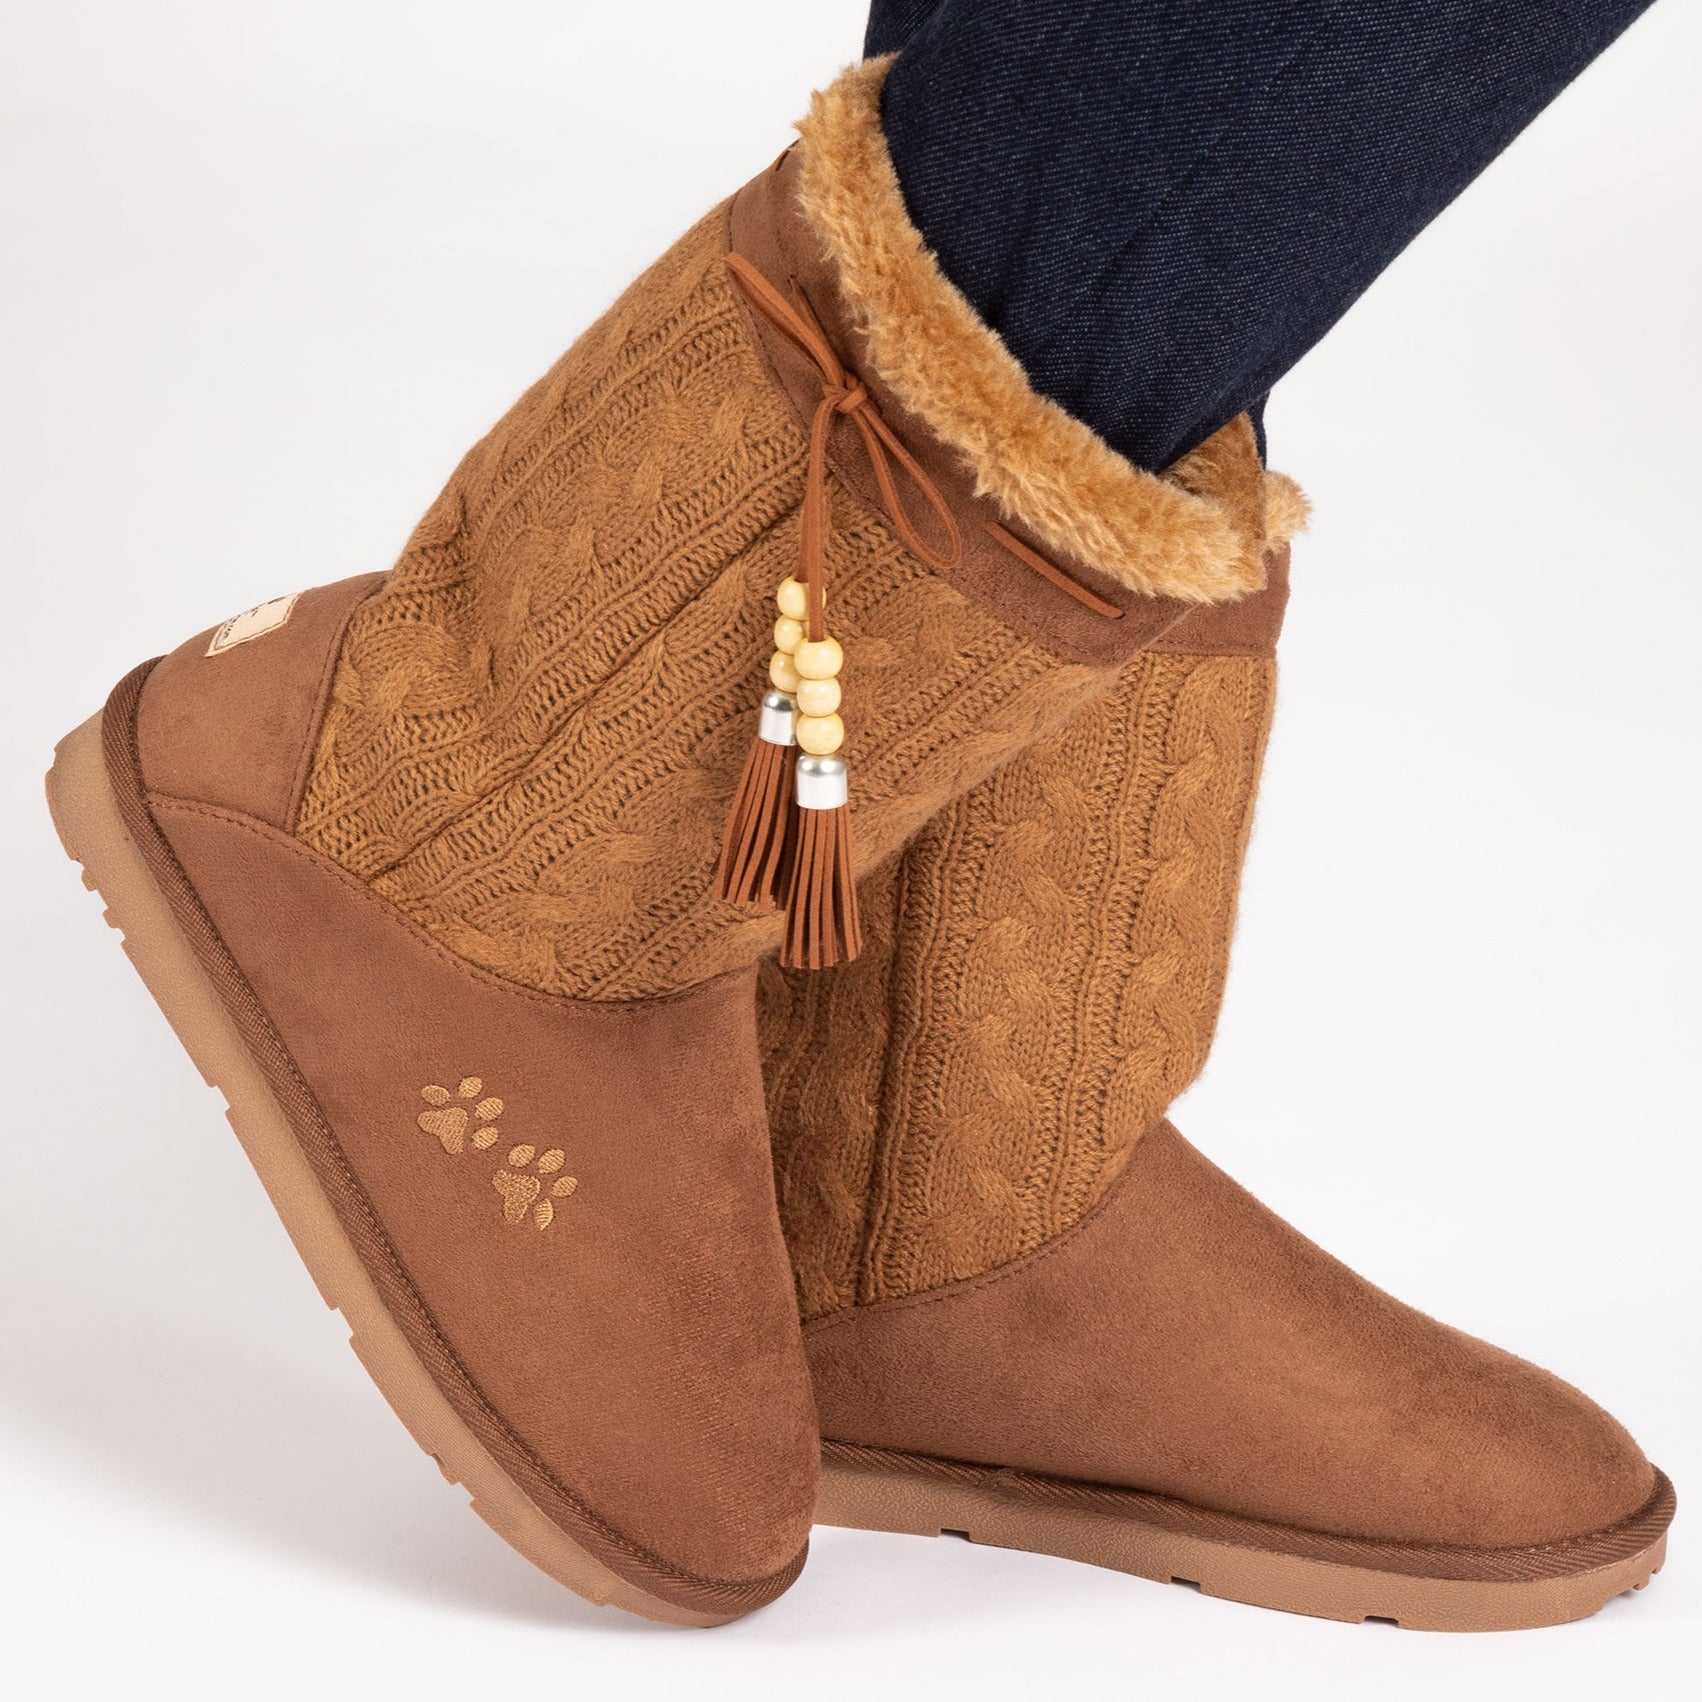 Paw Print Tall Knitted Boots With Beaded Tassels - Tan - 9